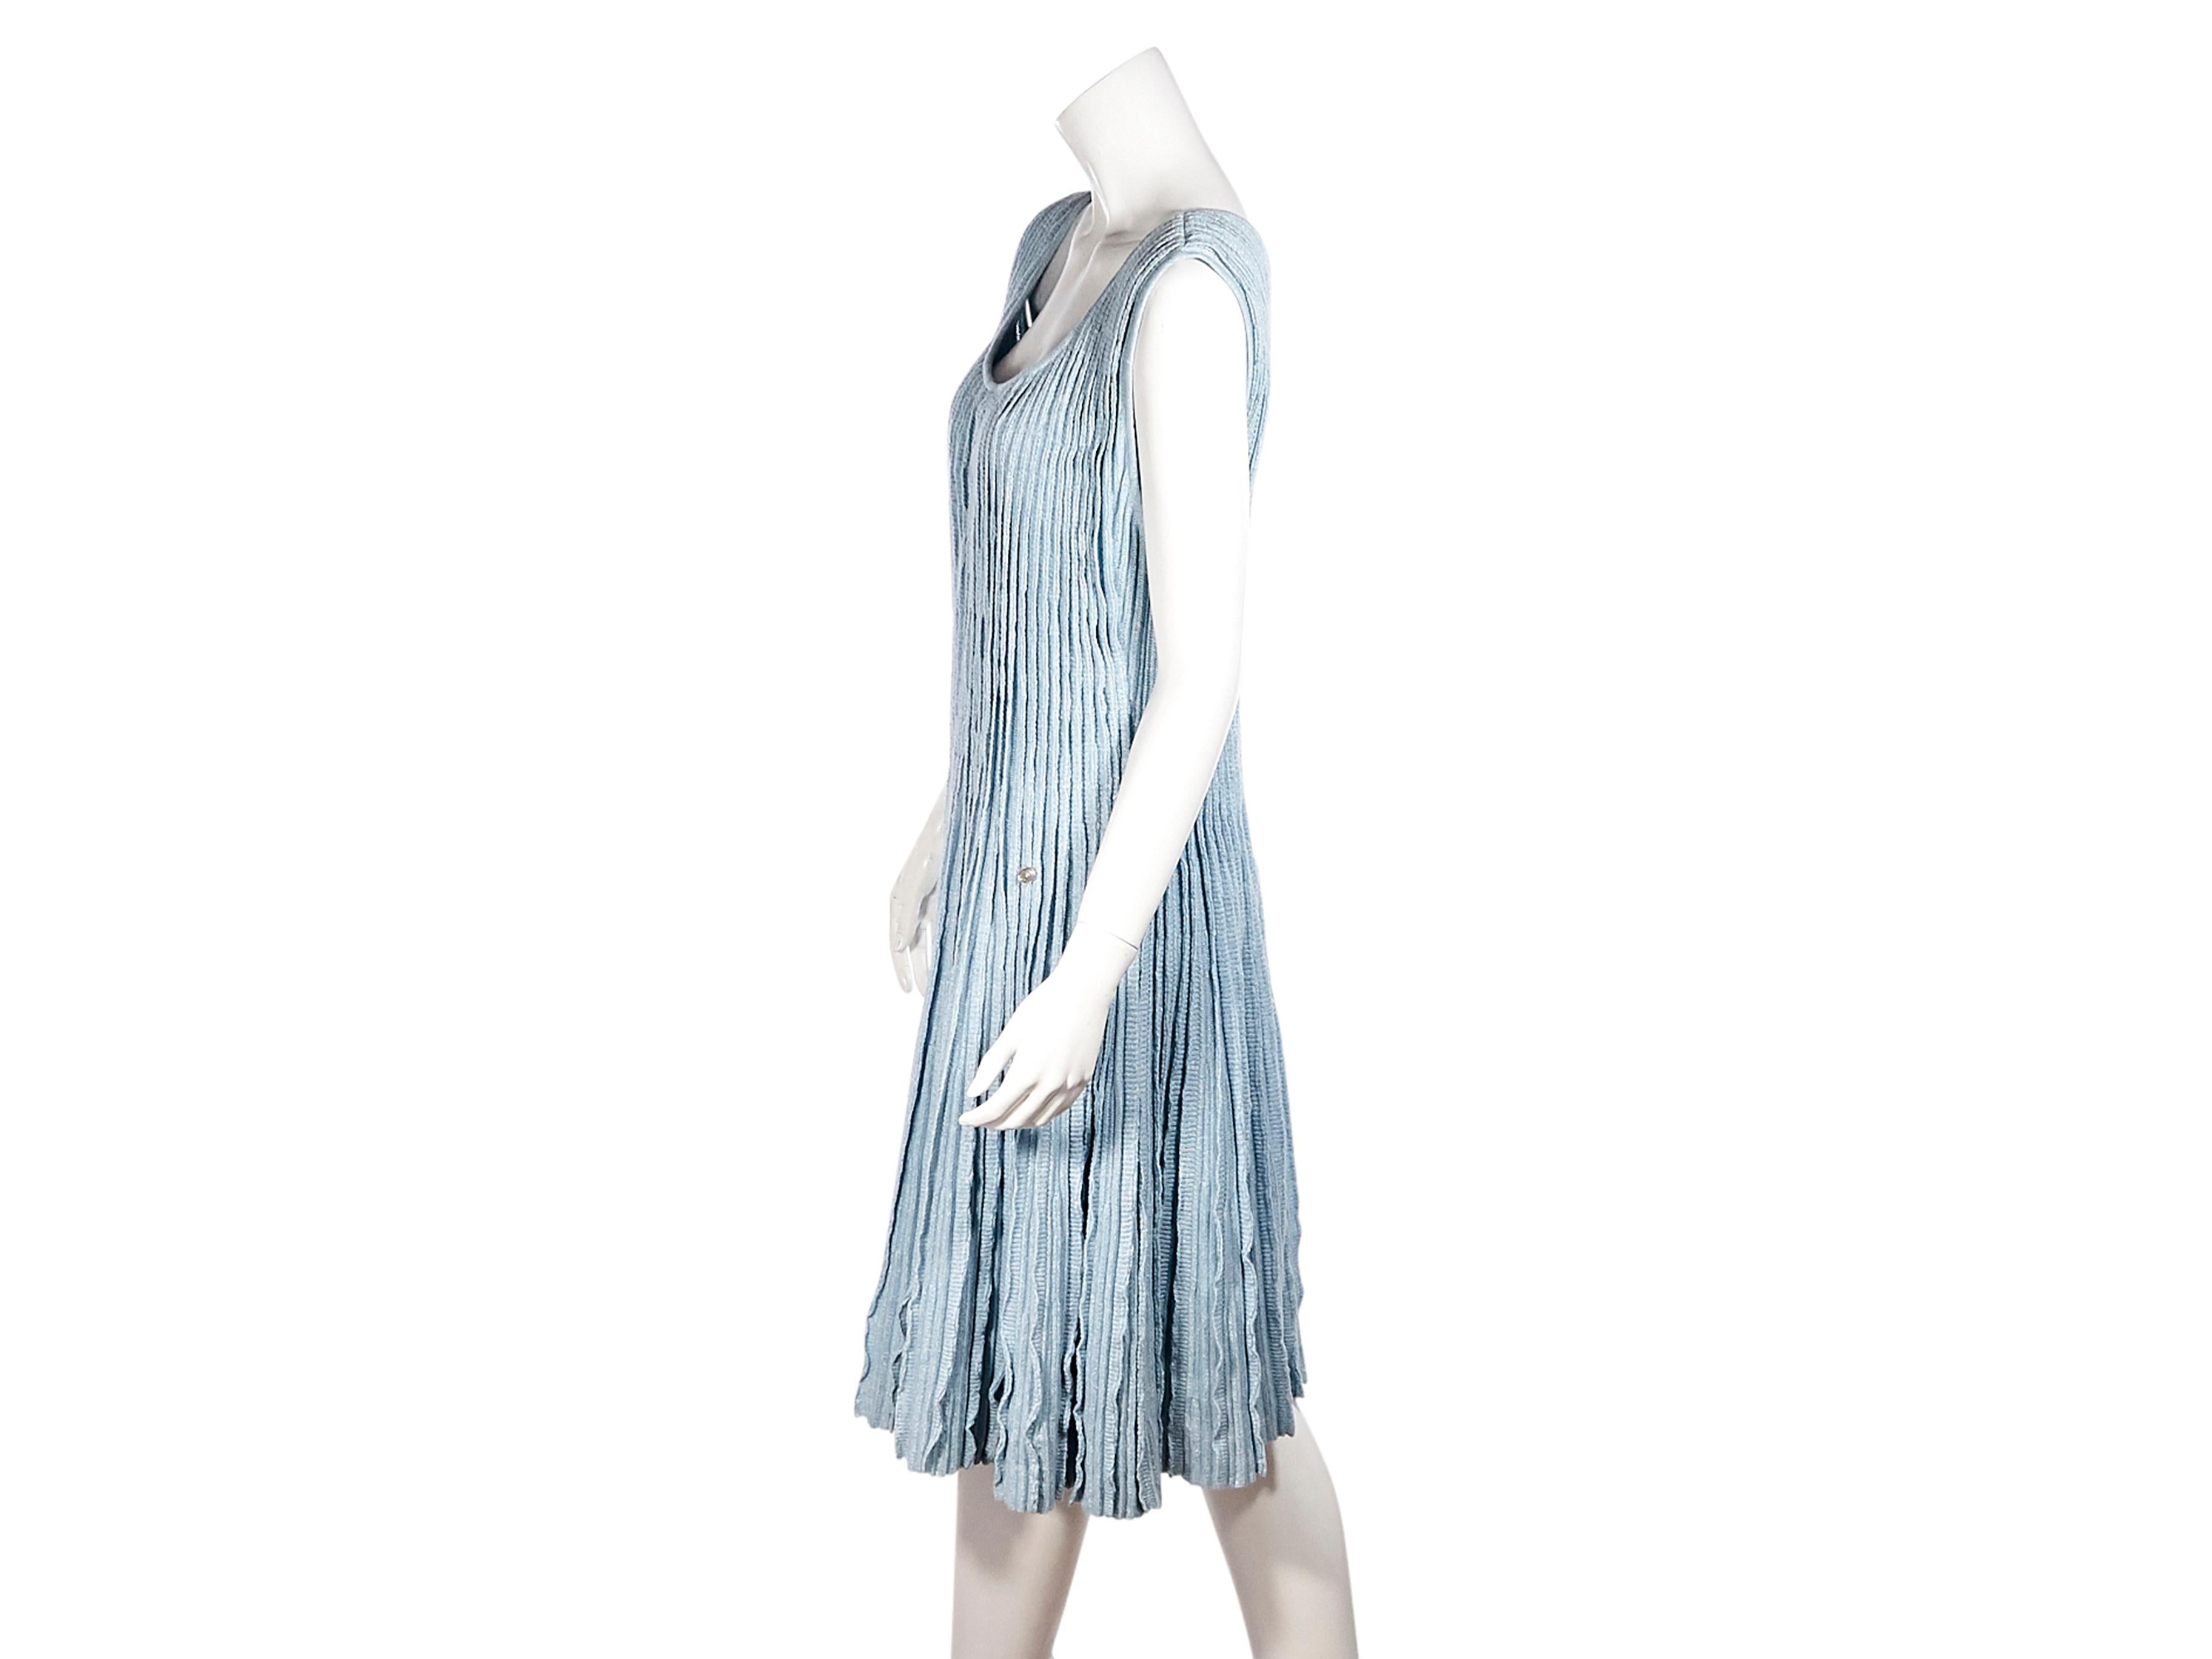 Product details:  Light blue cashmere/linen-blend knit tank dress by Chanel.  Deep scoopneck.  Sleeveless.  Pullover style.  36